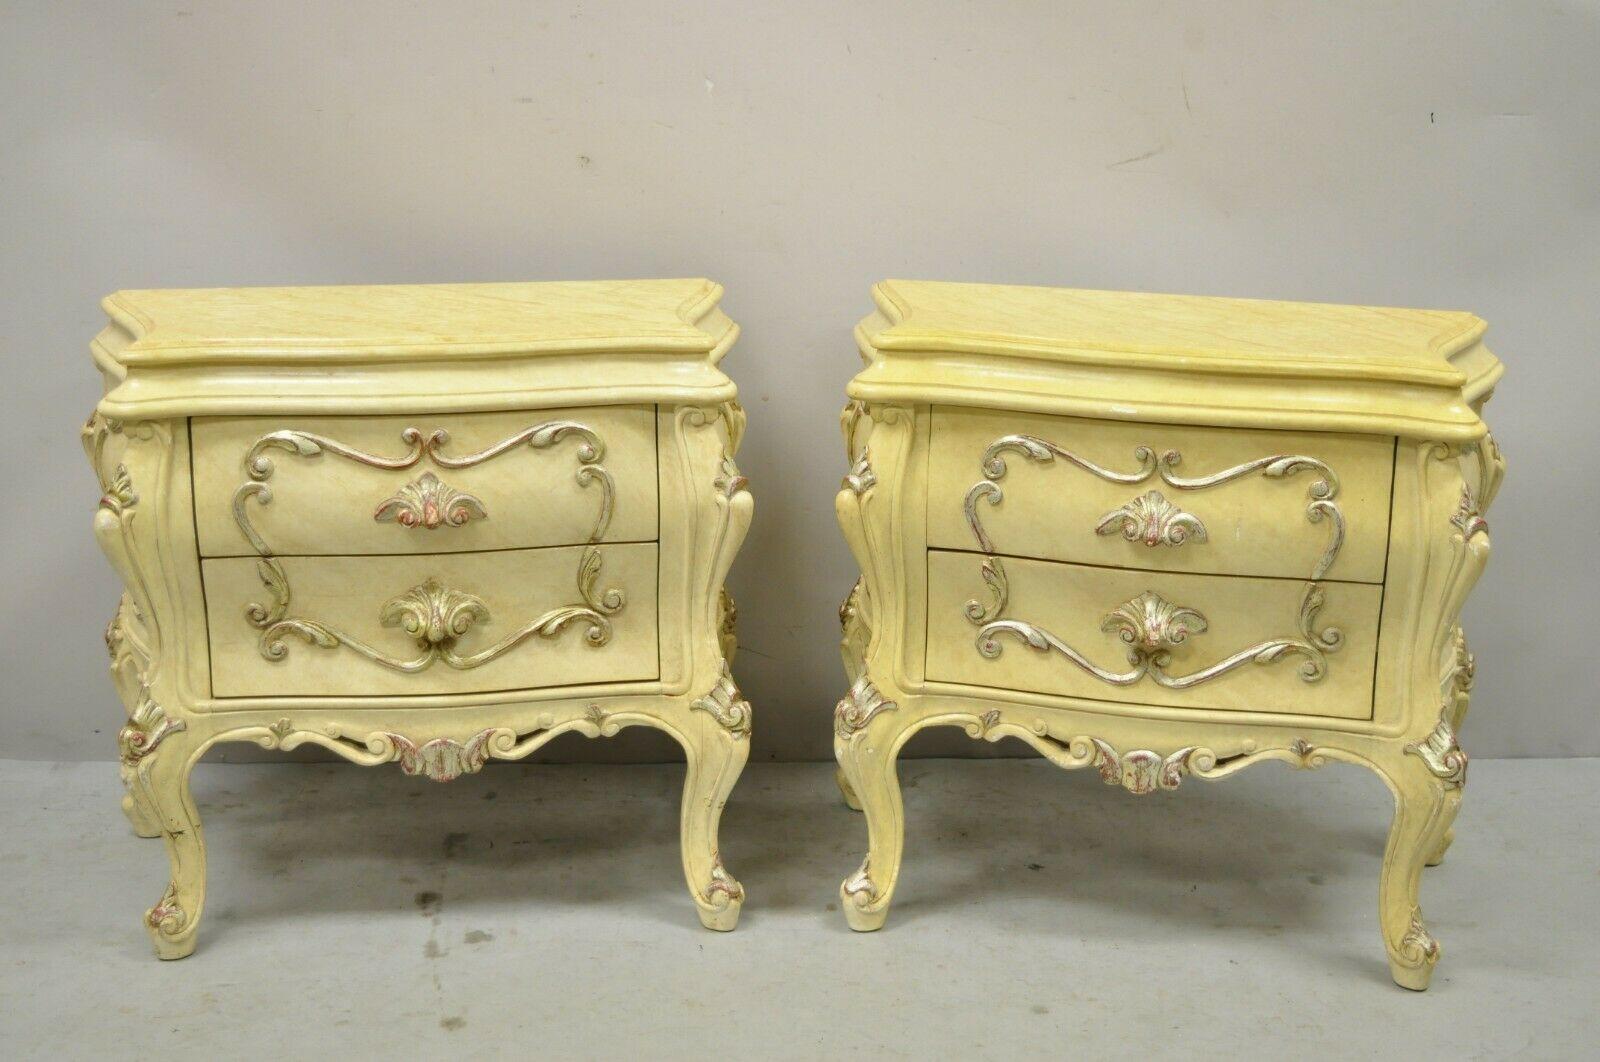 Vintage Italian Rococo cream lacquer 2 drawer nightstands bombe bedside commode - a pair. Item features distressed finish, nicely carved details, 2 drawers, cabriole, very nice vintage pair, quality Italian craftsmanship, great style and form. Circa